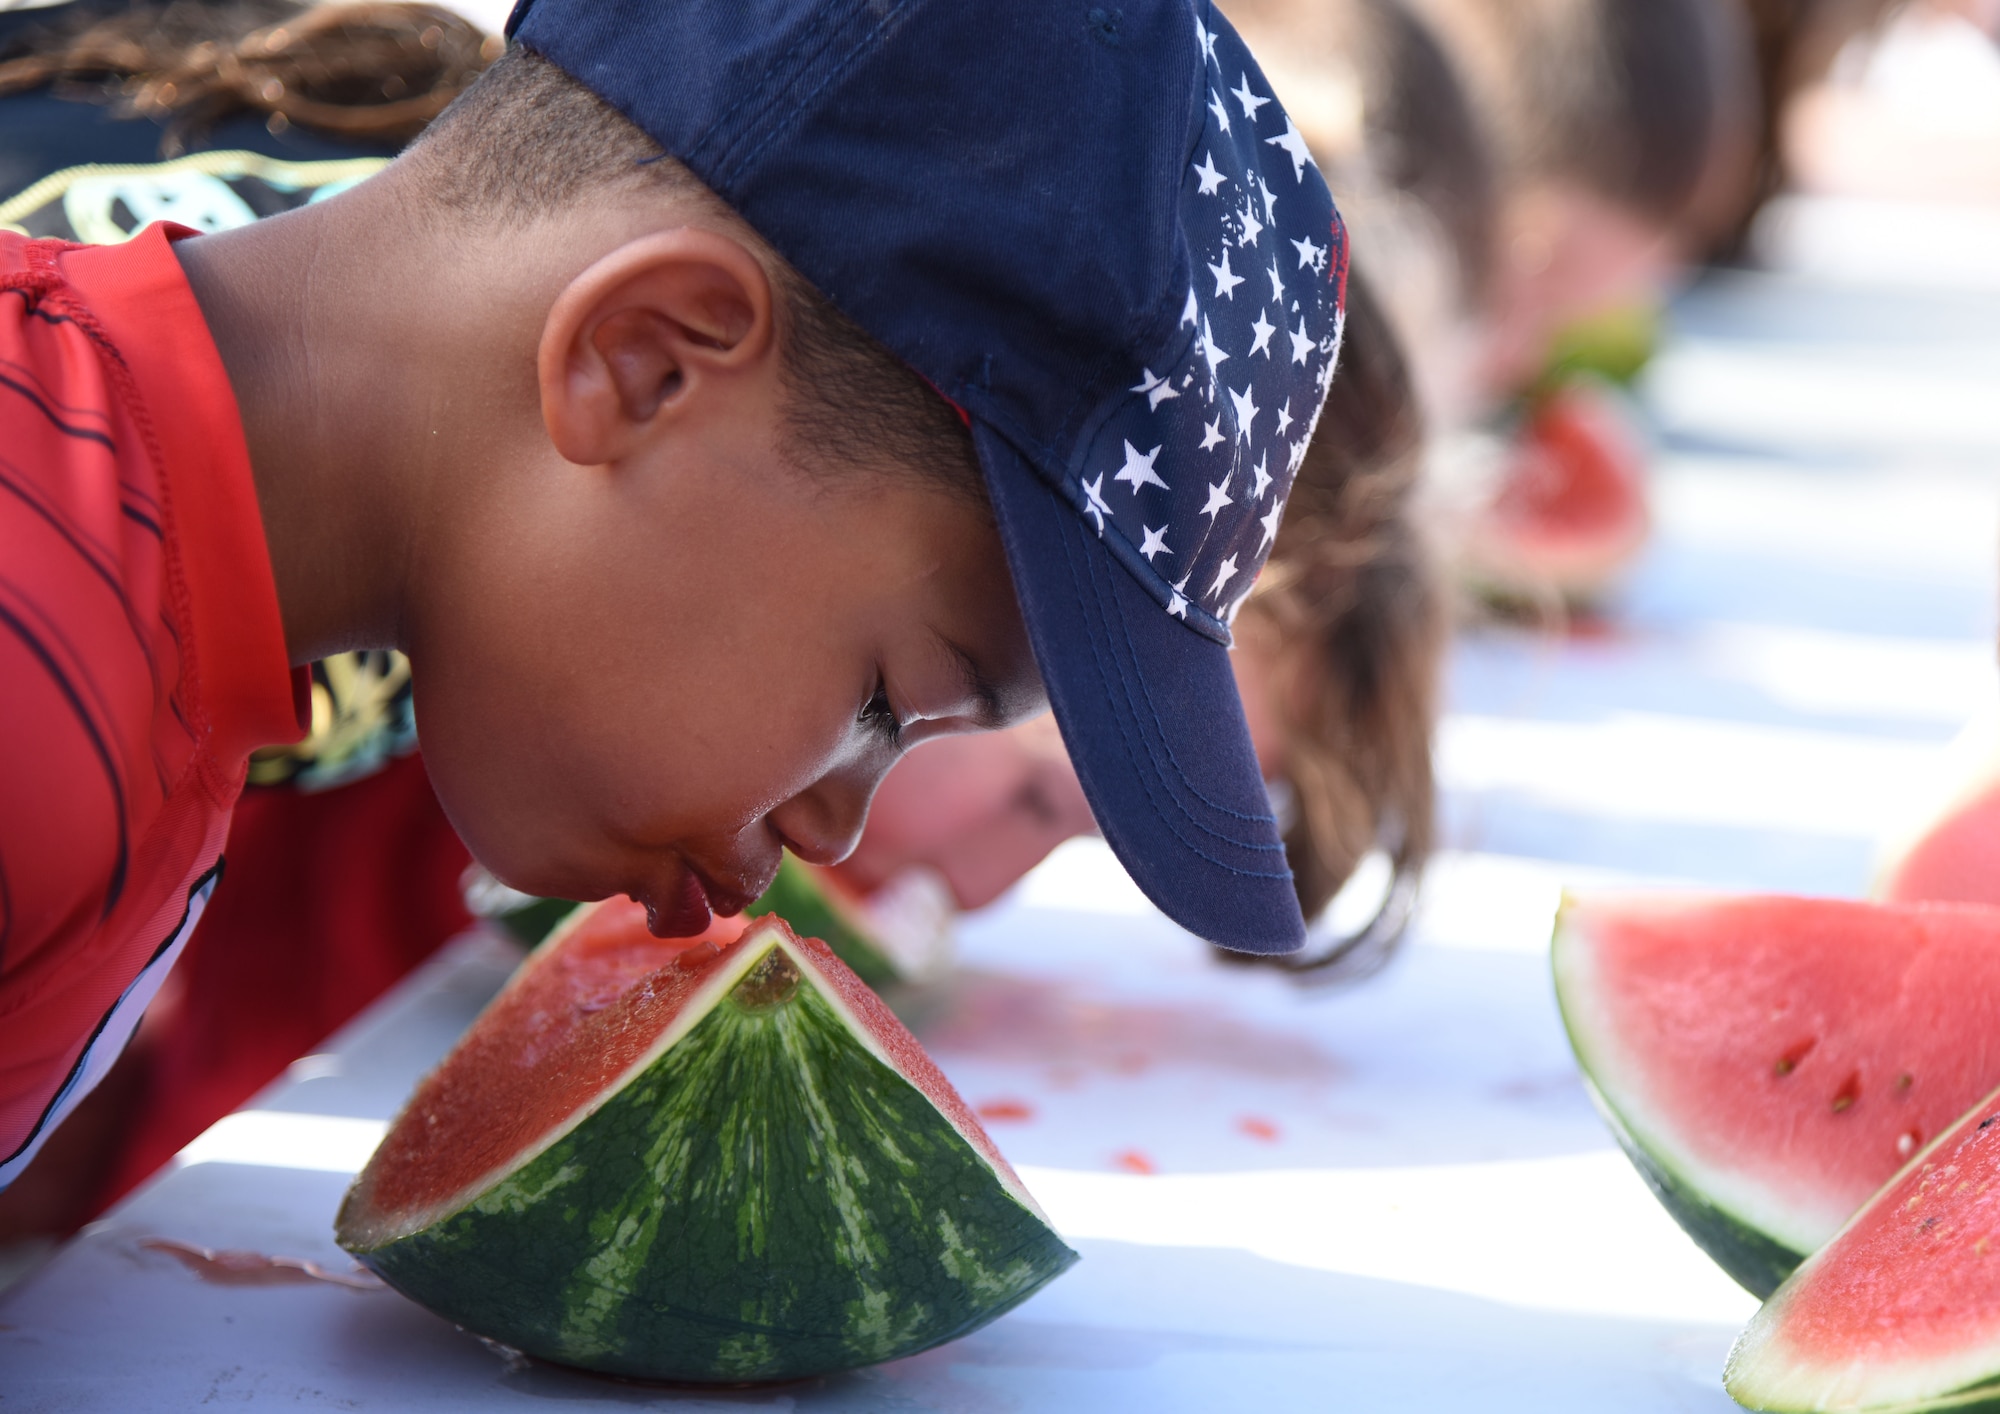 Josiah Trombley, son of Chief Master Sgt. Leonard Trombley, 81st Training Support Squadron superintendent, participates in the watermelon eating competition during the Pops in the Park event at Marina Park July 1, 2017, on Keesler Air Force Base, Miss. The event also included a kids’ fishing rodeo, mullet toss, fireworks display and music performances. (U.S. Air Force photo by Kemberly Groue)